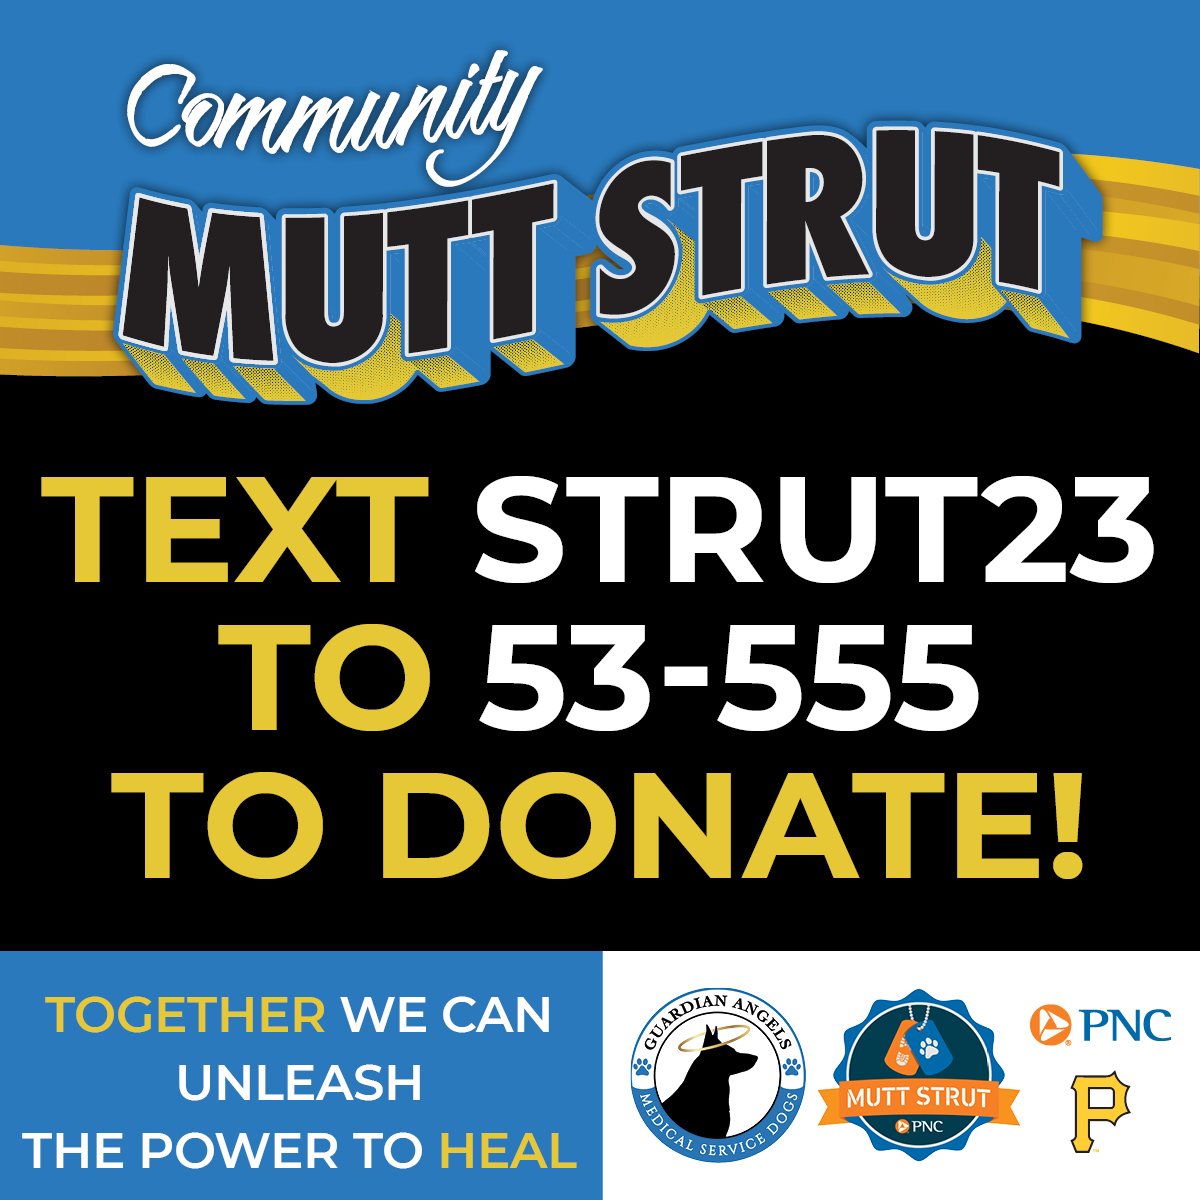 😇Want to support the #MuttStrut, presented by @PNCBank but nowhere near #Pittsburgh? 🤔 join in from your 💻 or ☎️🐾 💙text to give:'Strut23' to 53-555. Or, register for our online #auction! Itll be LIVE until 9/16 at 1:30 pm. Visit givebutter.com/c/MuttStrut23 to register